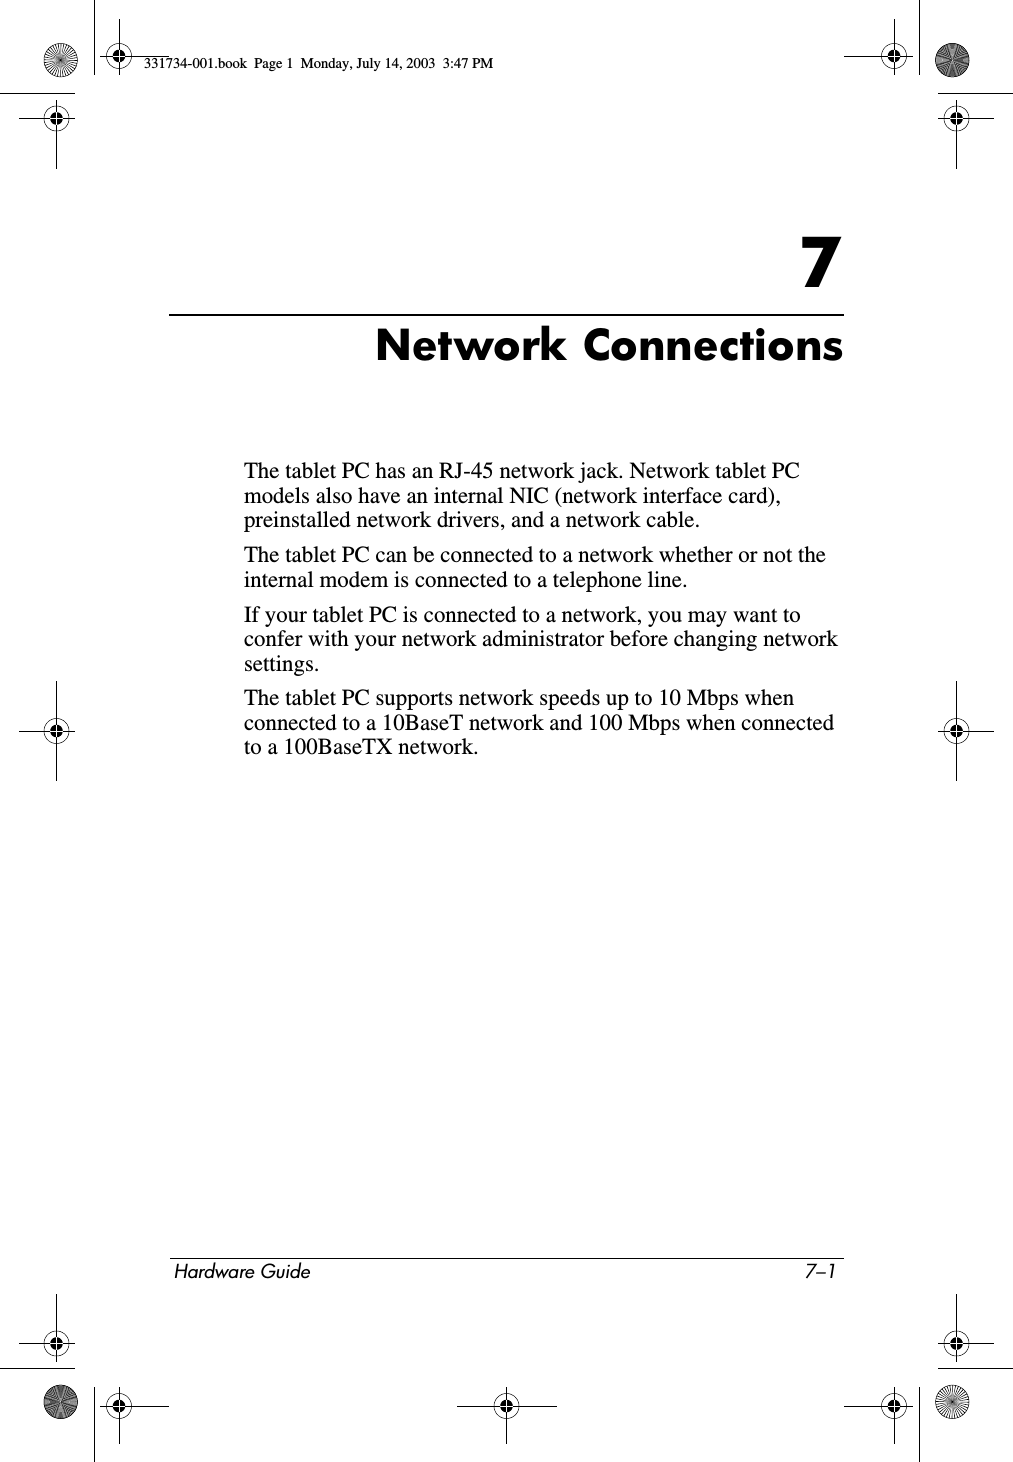 Hardware Guide 7–17Network ConnectionsThe tablet PC has an RJ-45 network jack. Network tablet PC models also have an internal NIC (network interface card), preinstalled network drivers, and a network cable.The tablet PC can be connected to a network whether or not the internal modem is connected to a telephone line.If your tablet PC is connected to a network, you may want to confer with your network administrator before changing network settings.The tablet PC supports network speeds up to 10 Mbps when connected to a 10BaseT network and 100 Mbps when connected to a 100BaseTX network.331734-001.book  Page 1  Monday, July 14, 2003  3:47 PM